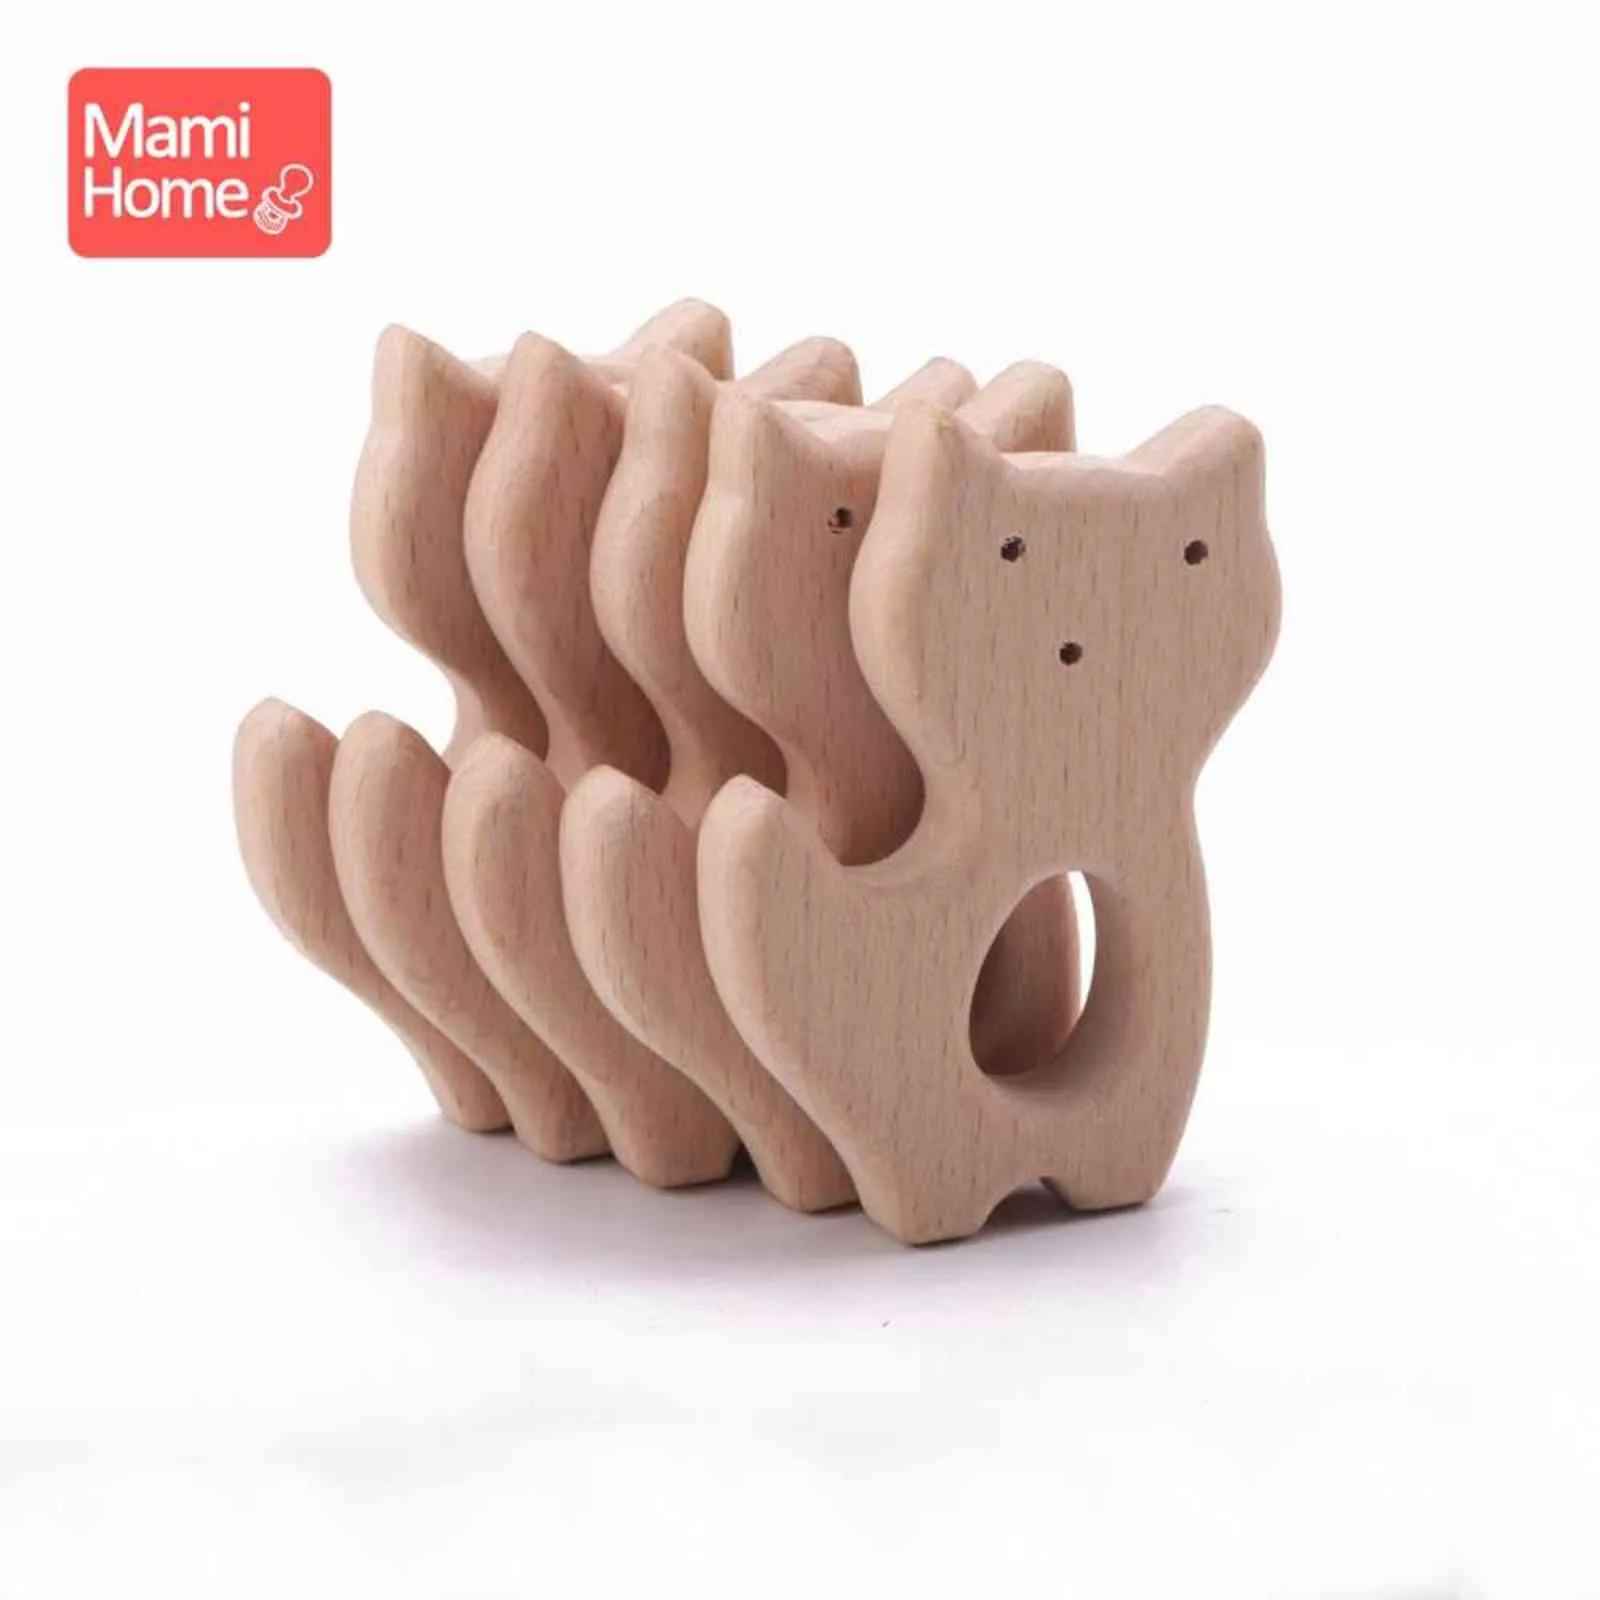 Baby Wooden Teether Animal Beech Pacifier Pendant BPA Wood Teeth Blank Rodent Teether Toy Nursing Gift Children039s G9772111